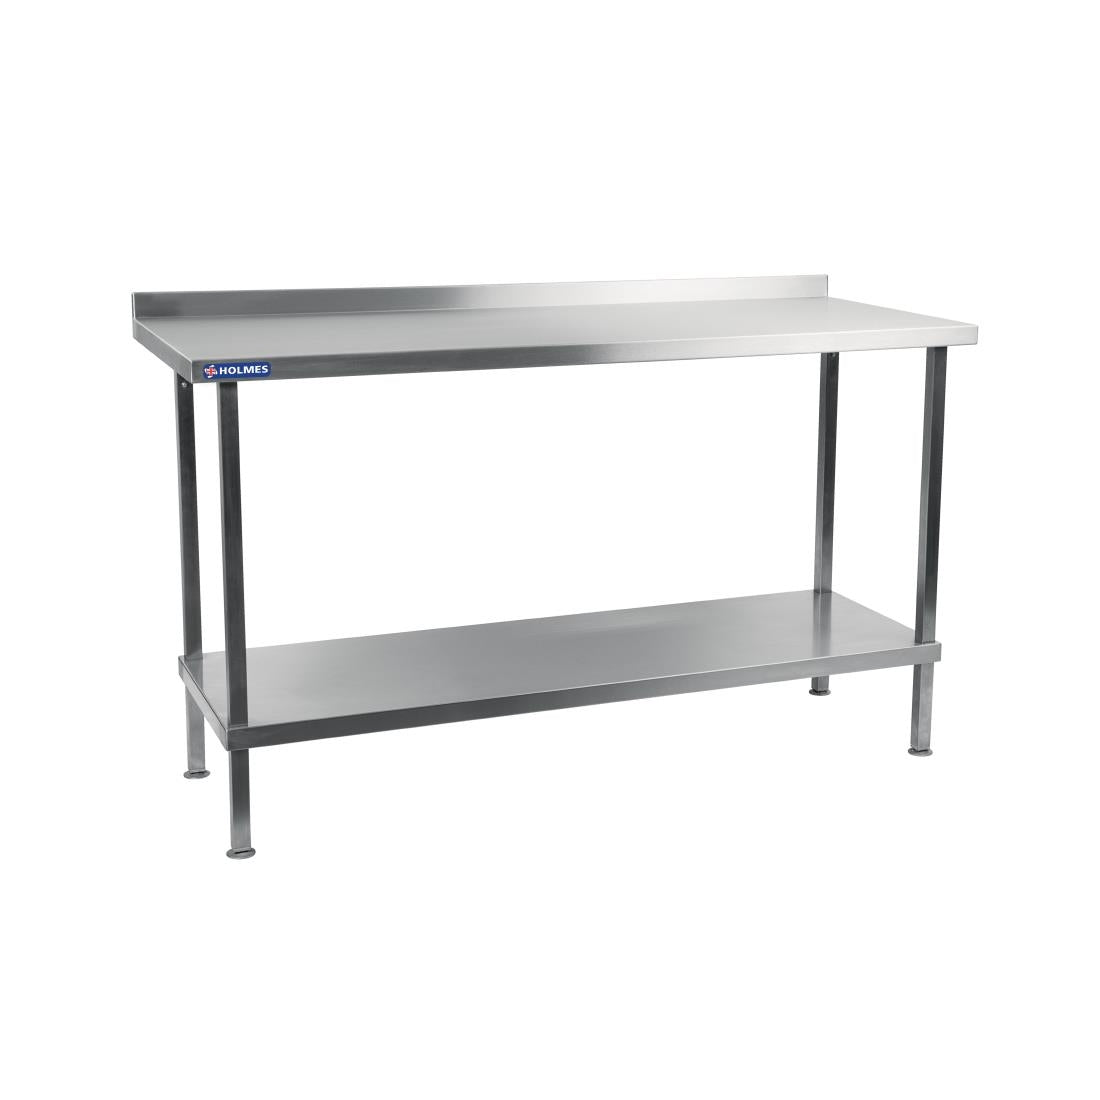 DR023 Holmes Stainless Steel Wall Table with Upstand 1500mm JD Catering Equipment Solutions Ltd